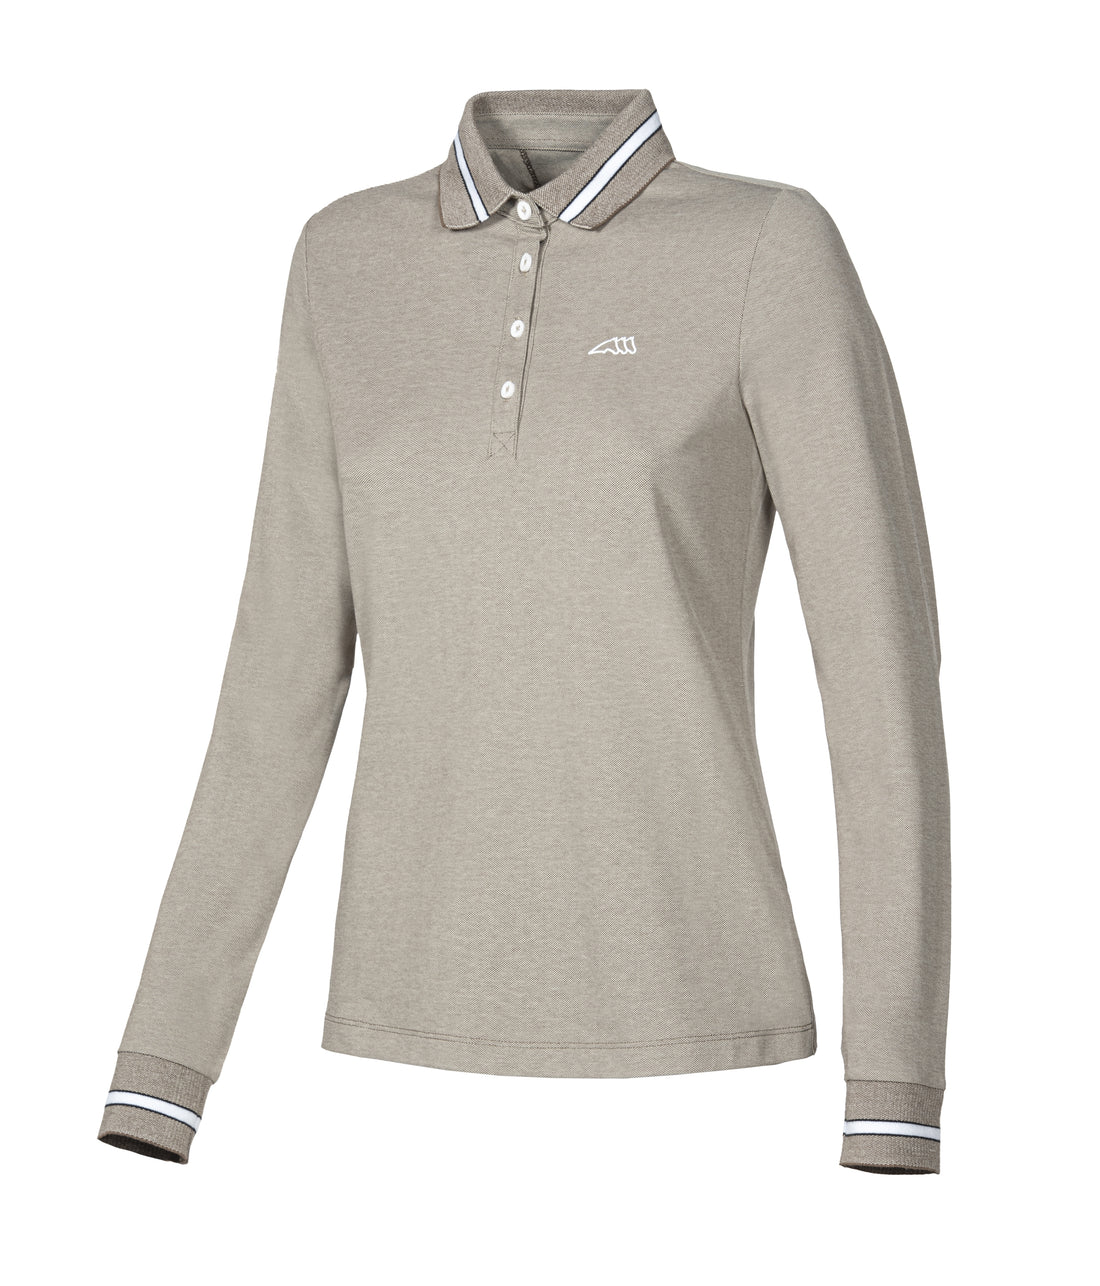 Equiline Elenos dame polo bluse, Sand